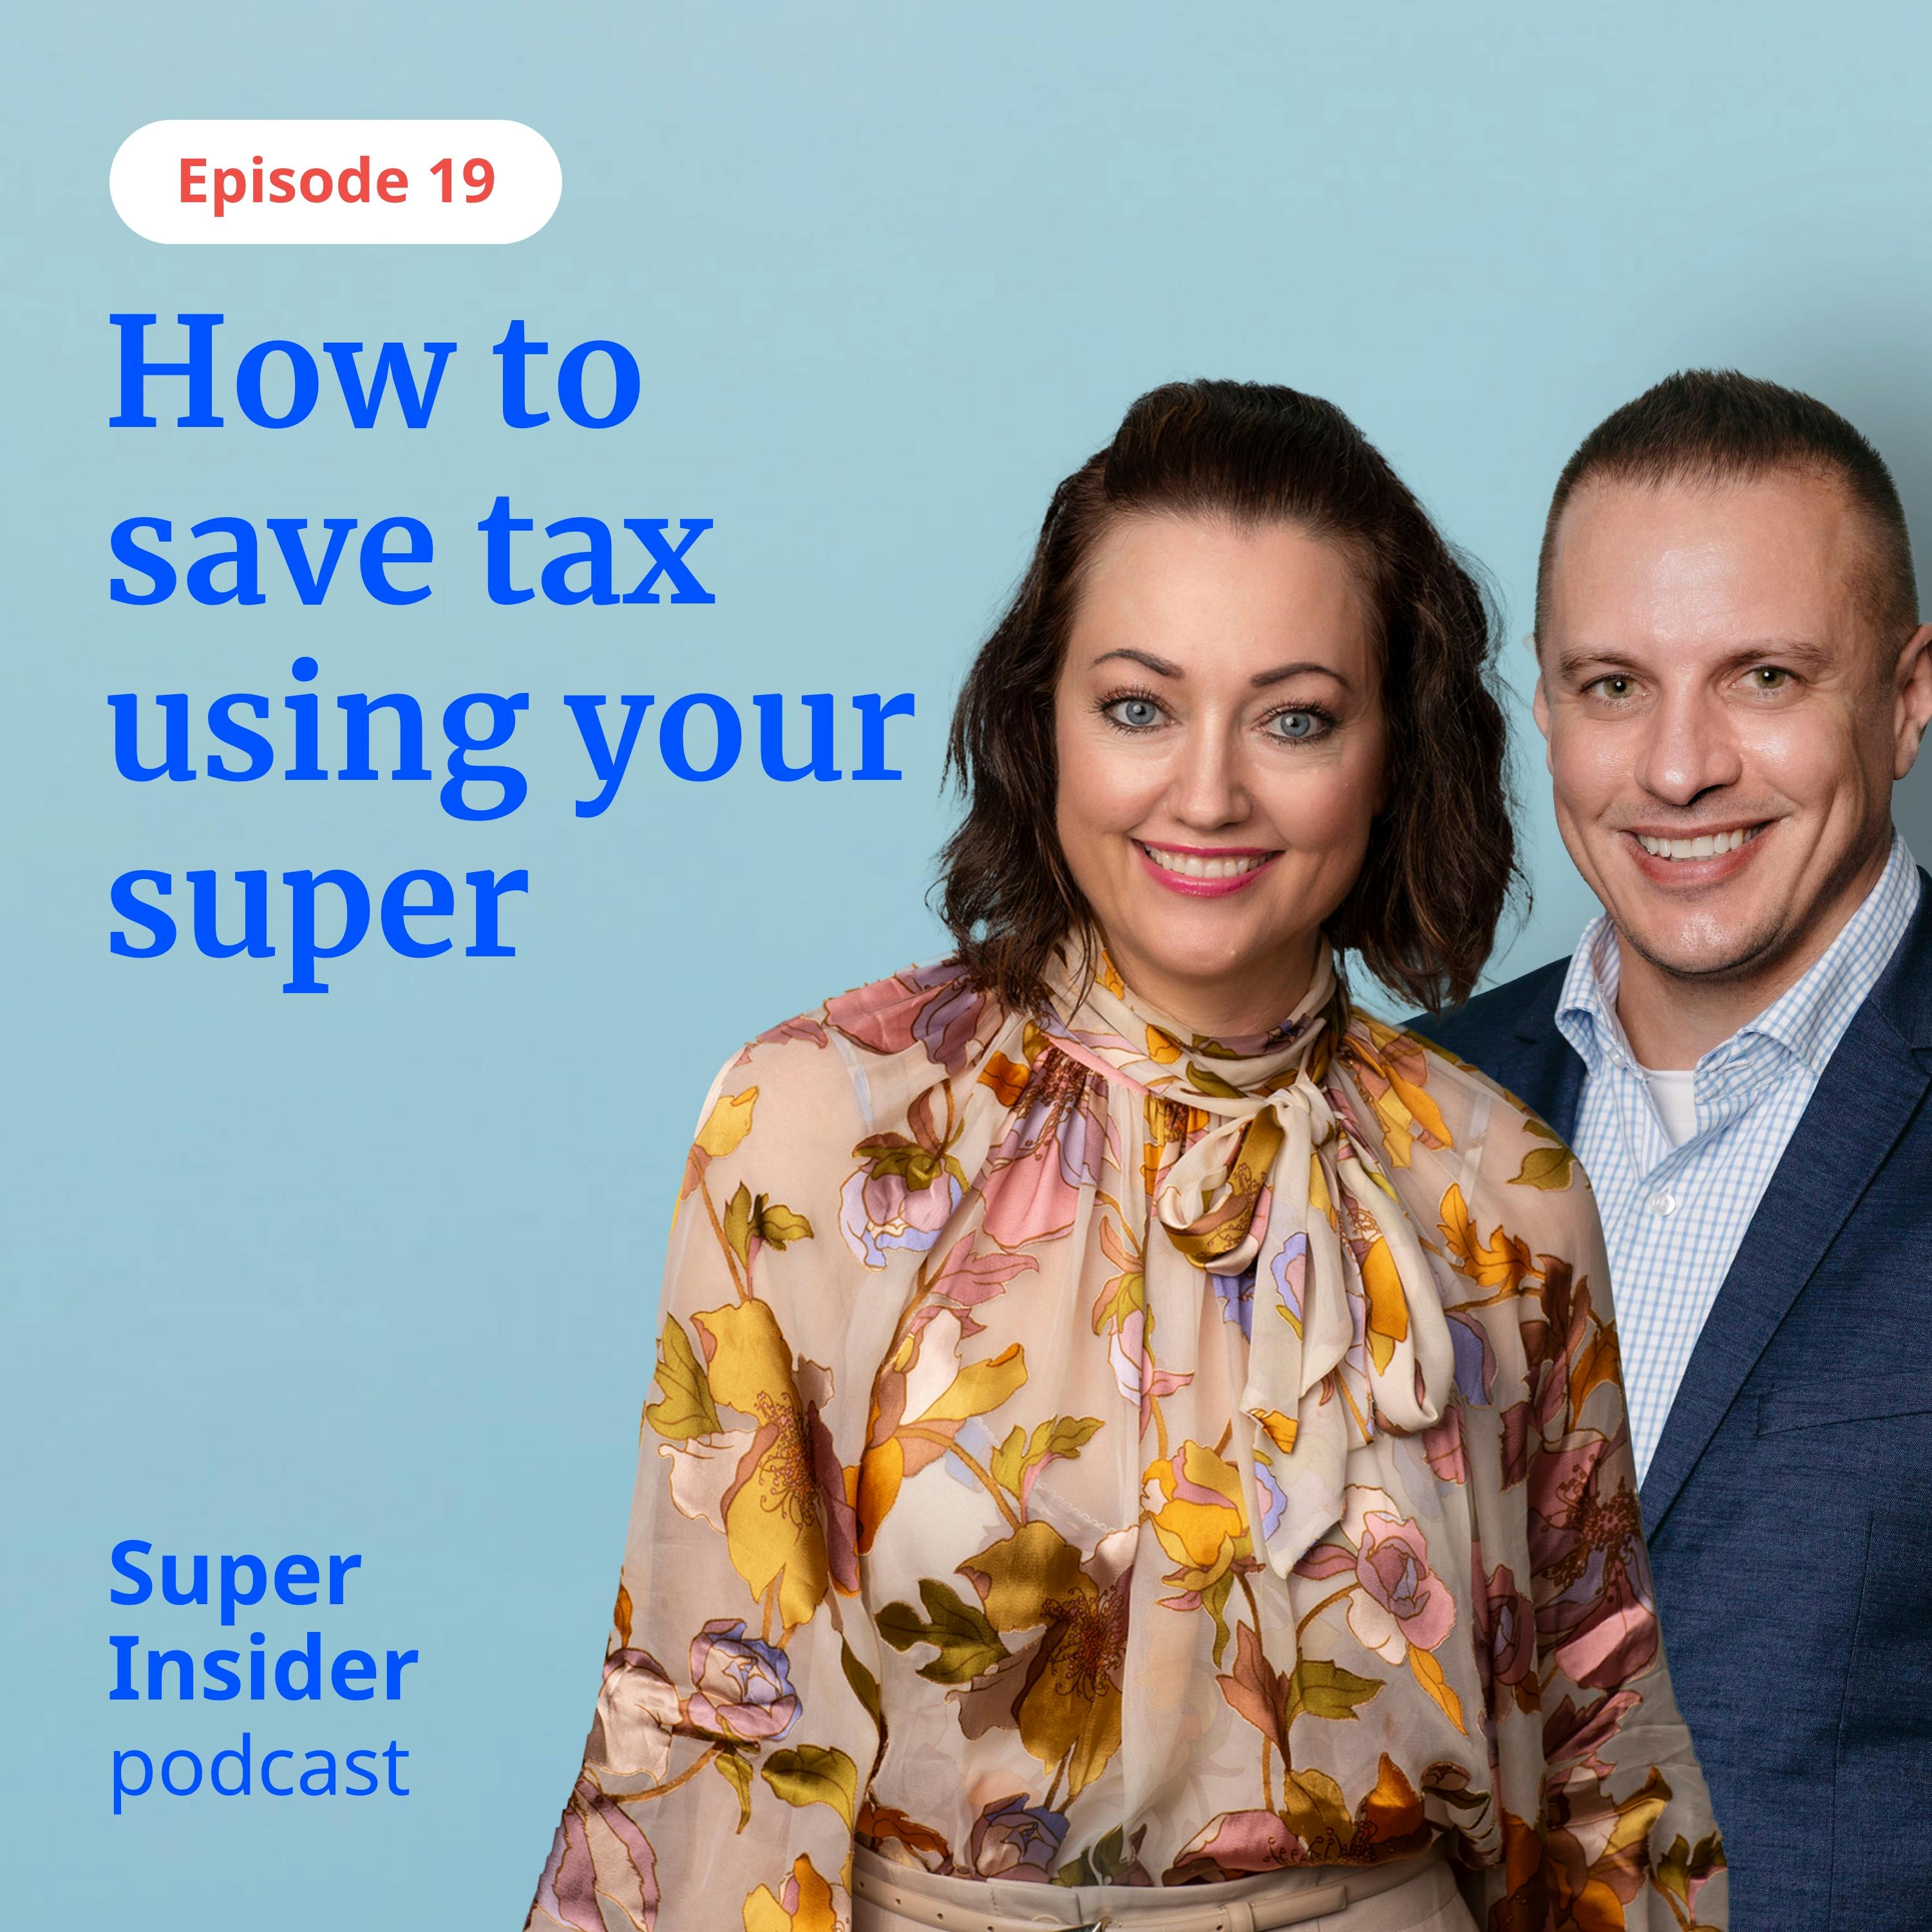 How to save tax using your super